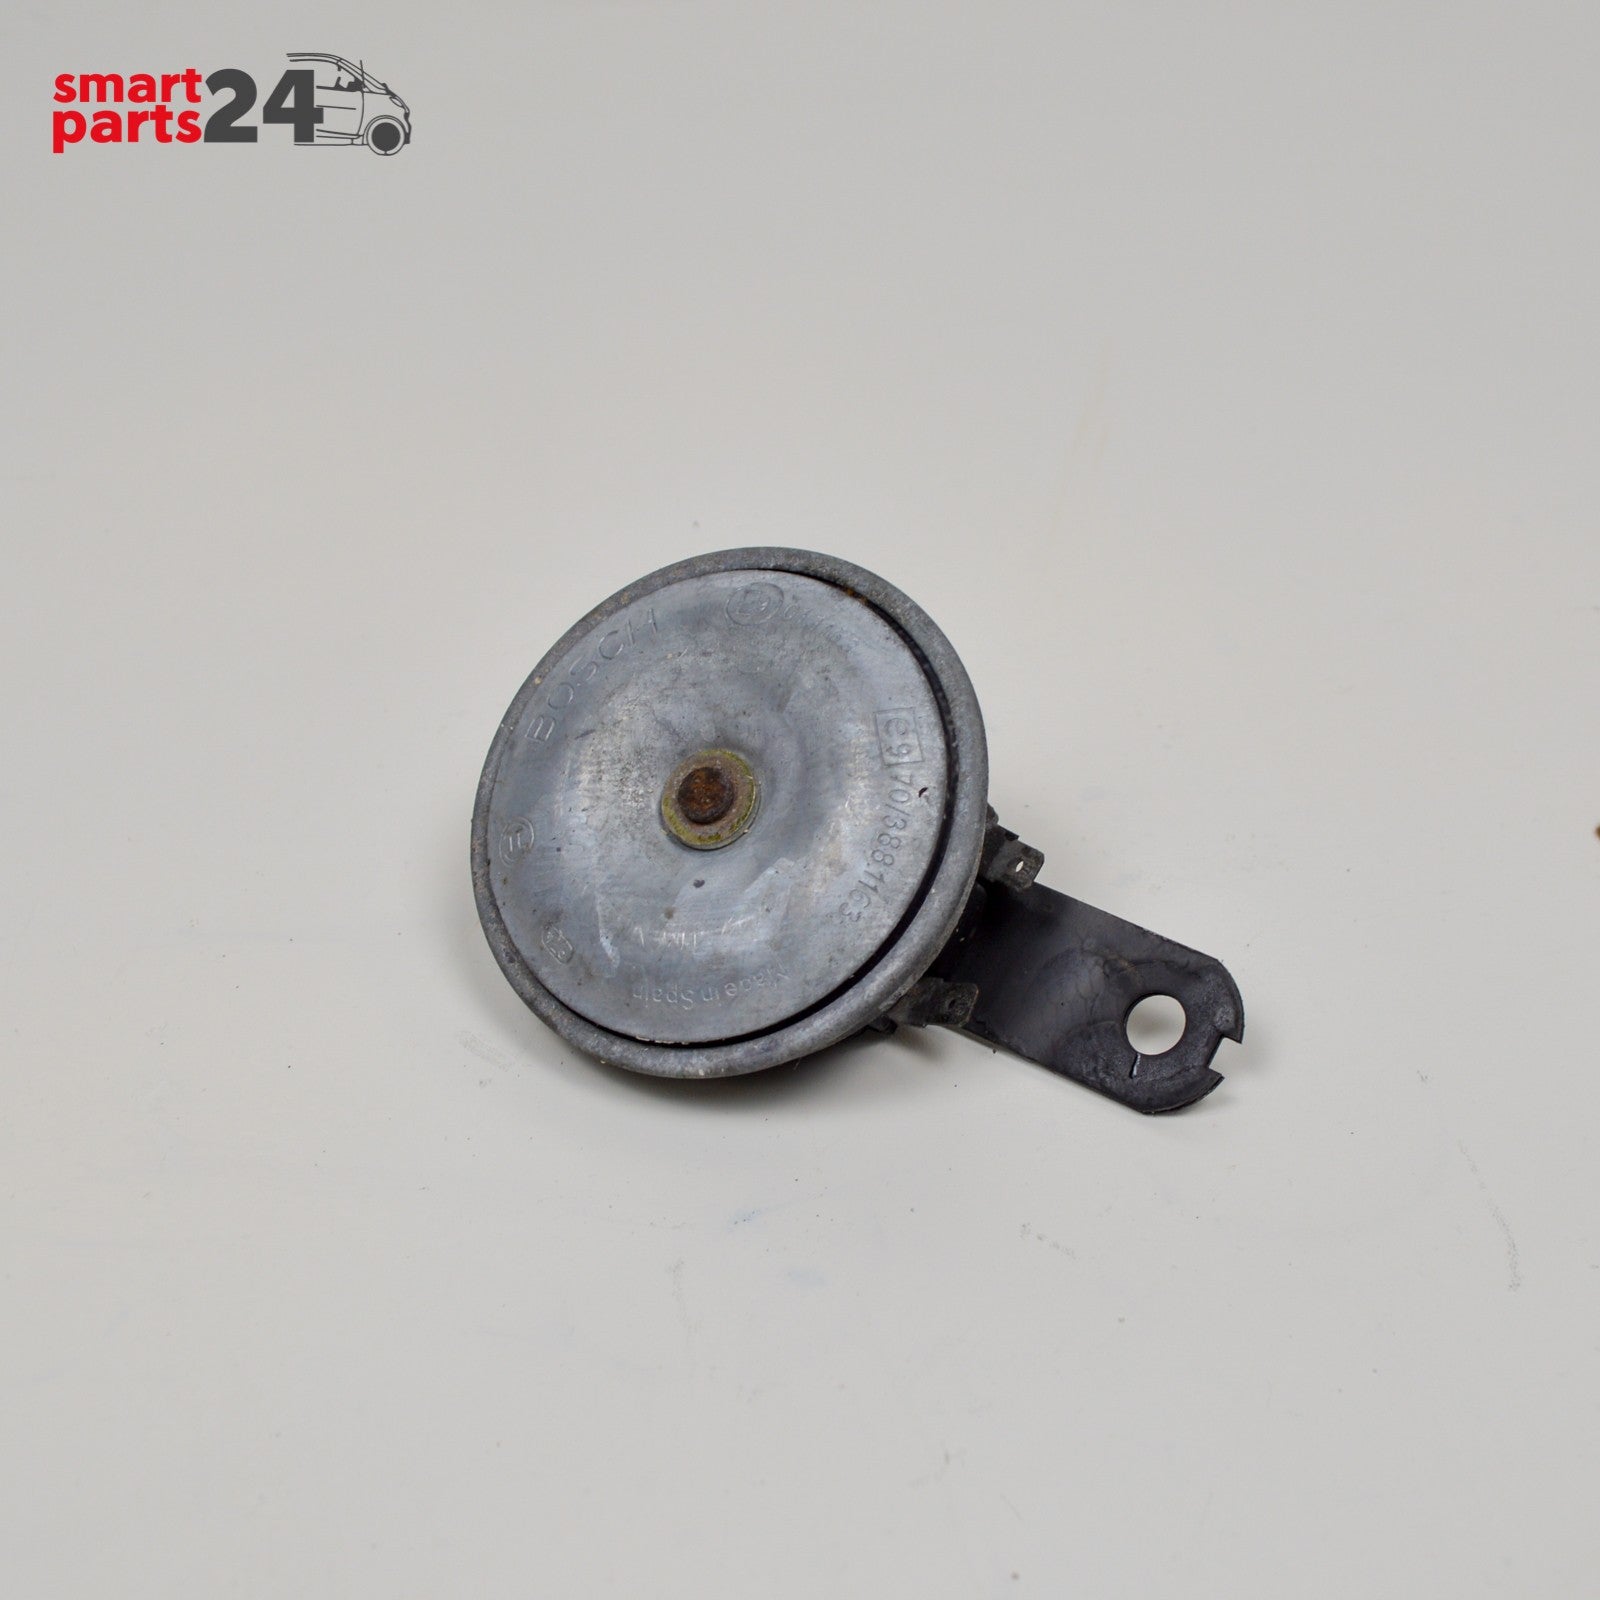 Smart Fortwo 450 Horn Signal Horn Bosch (used)